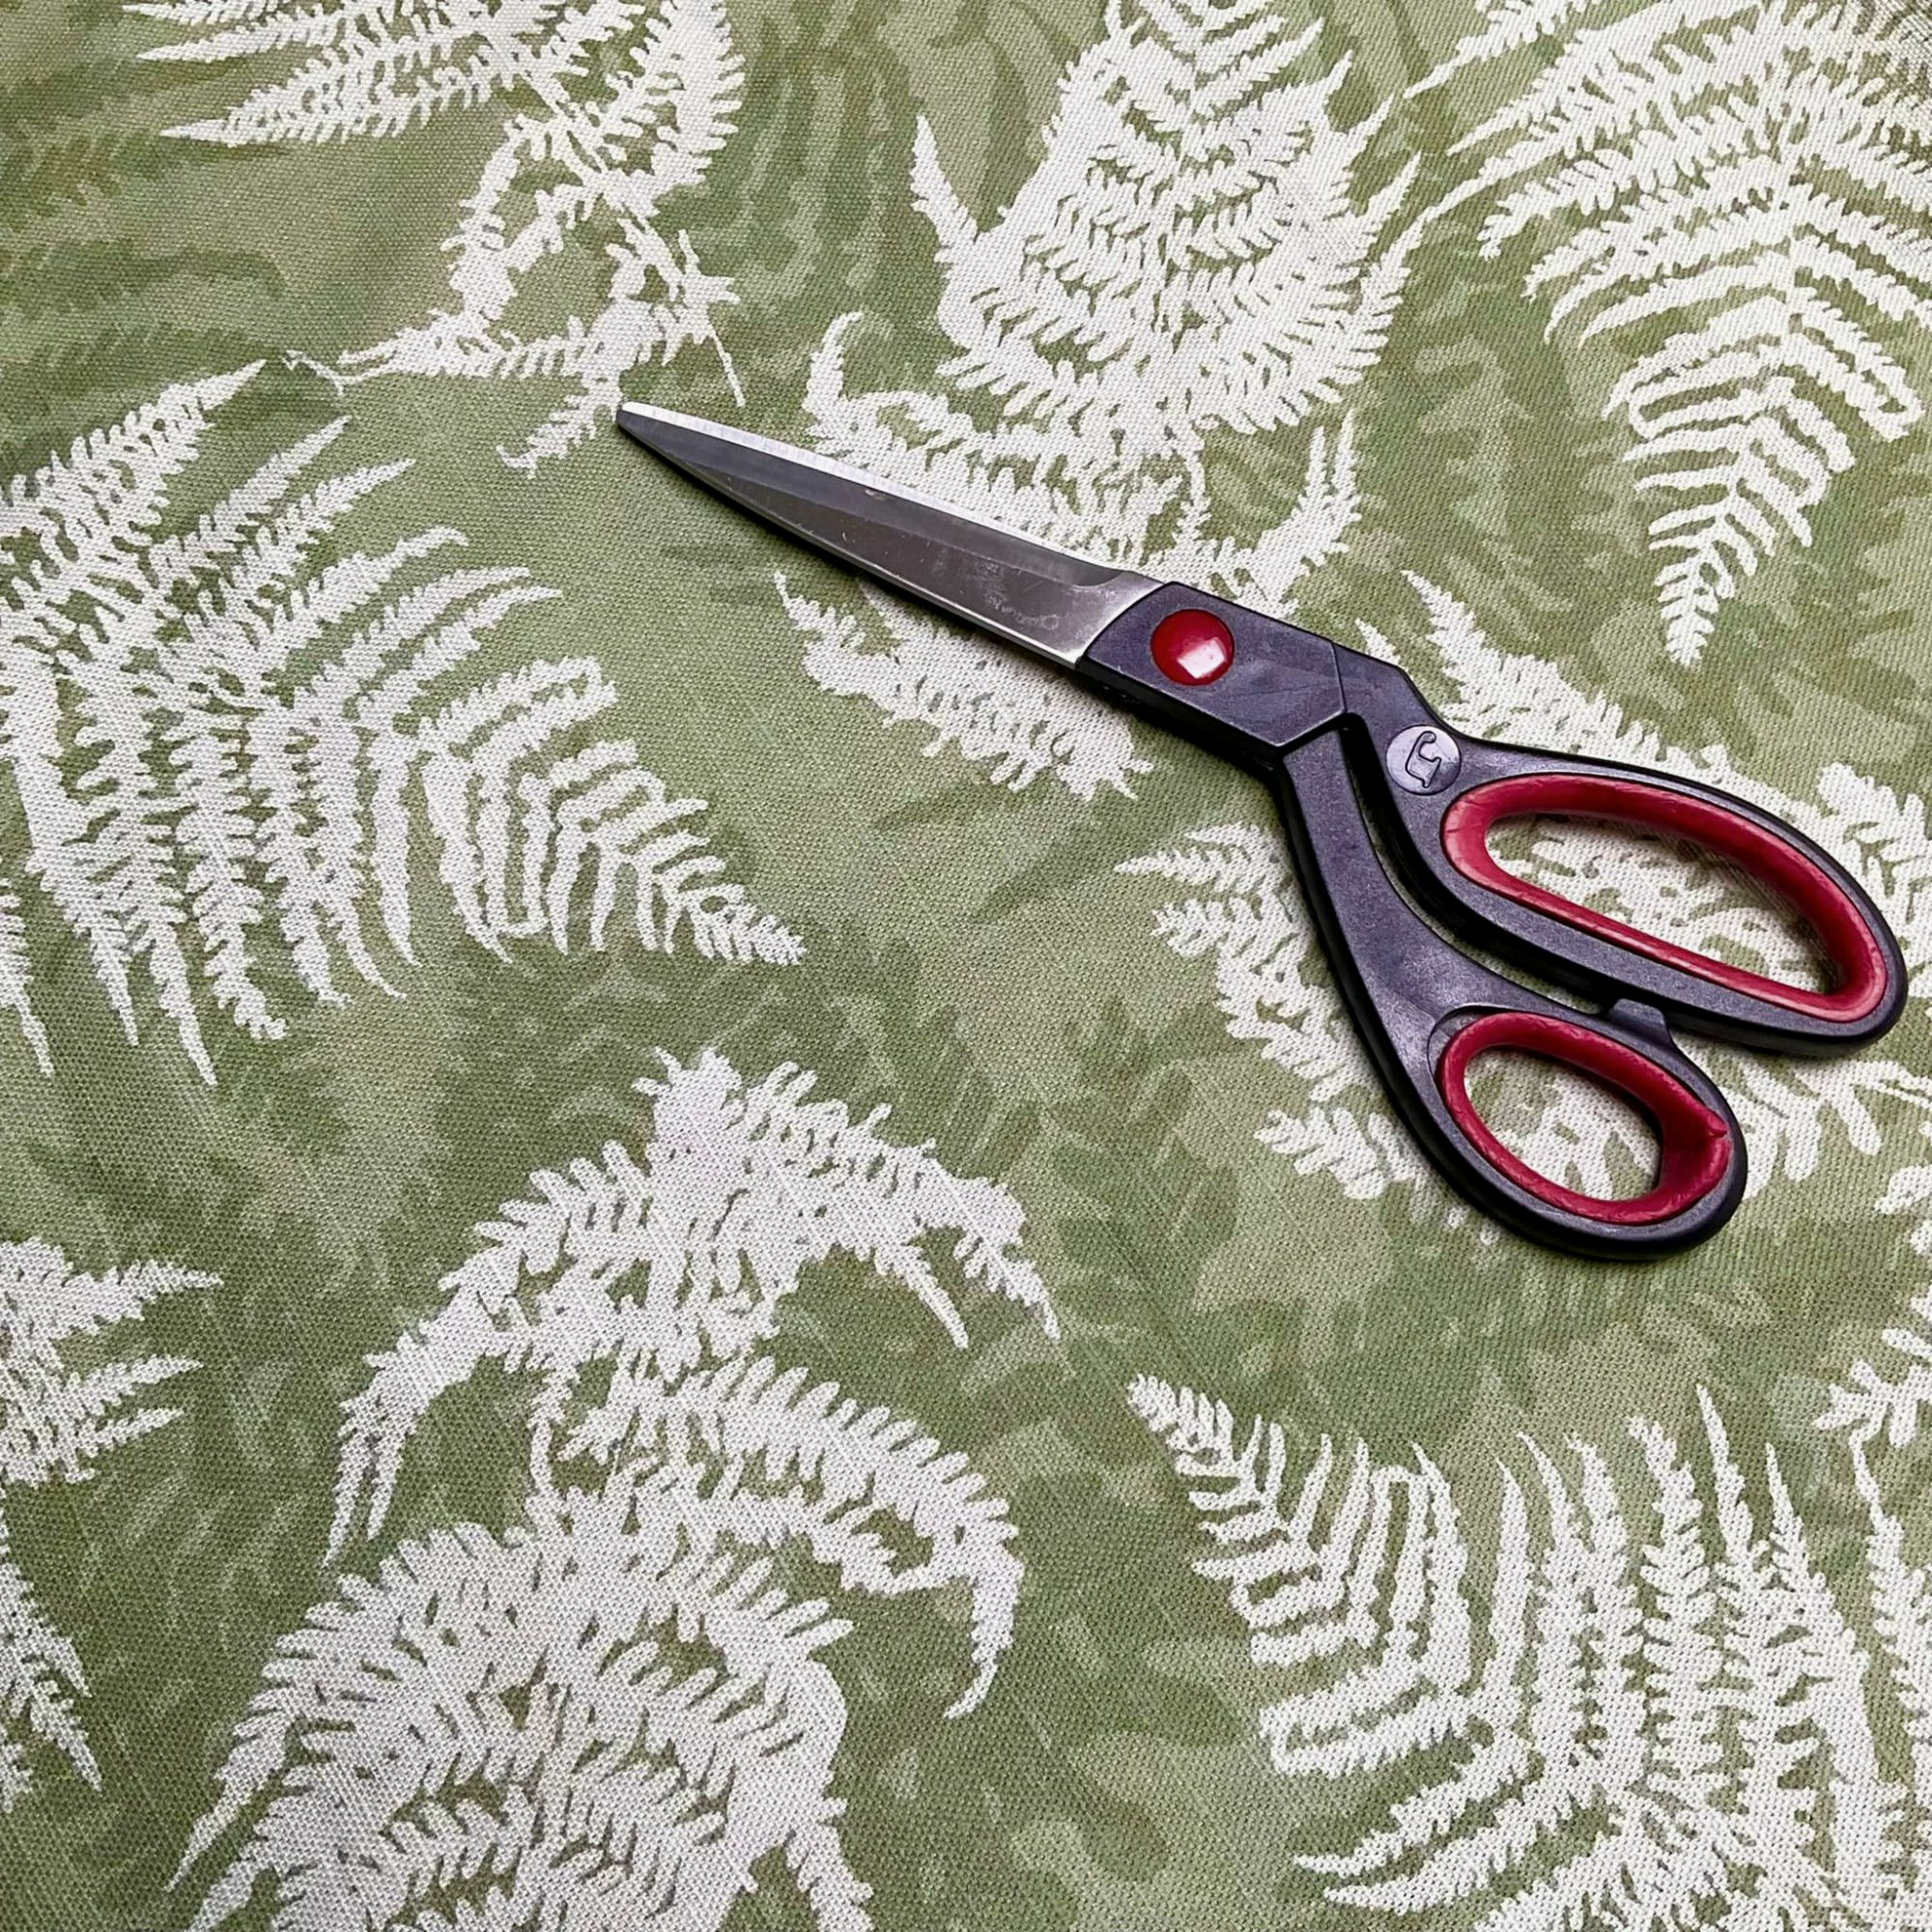 Green fabric with a fern print on and a pair of scissors is laid on the fabric